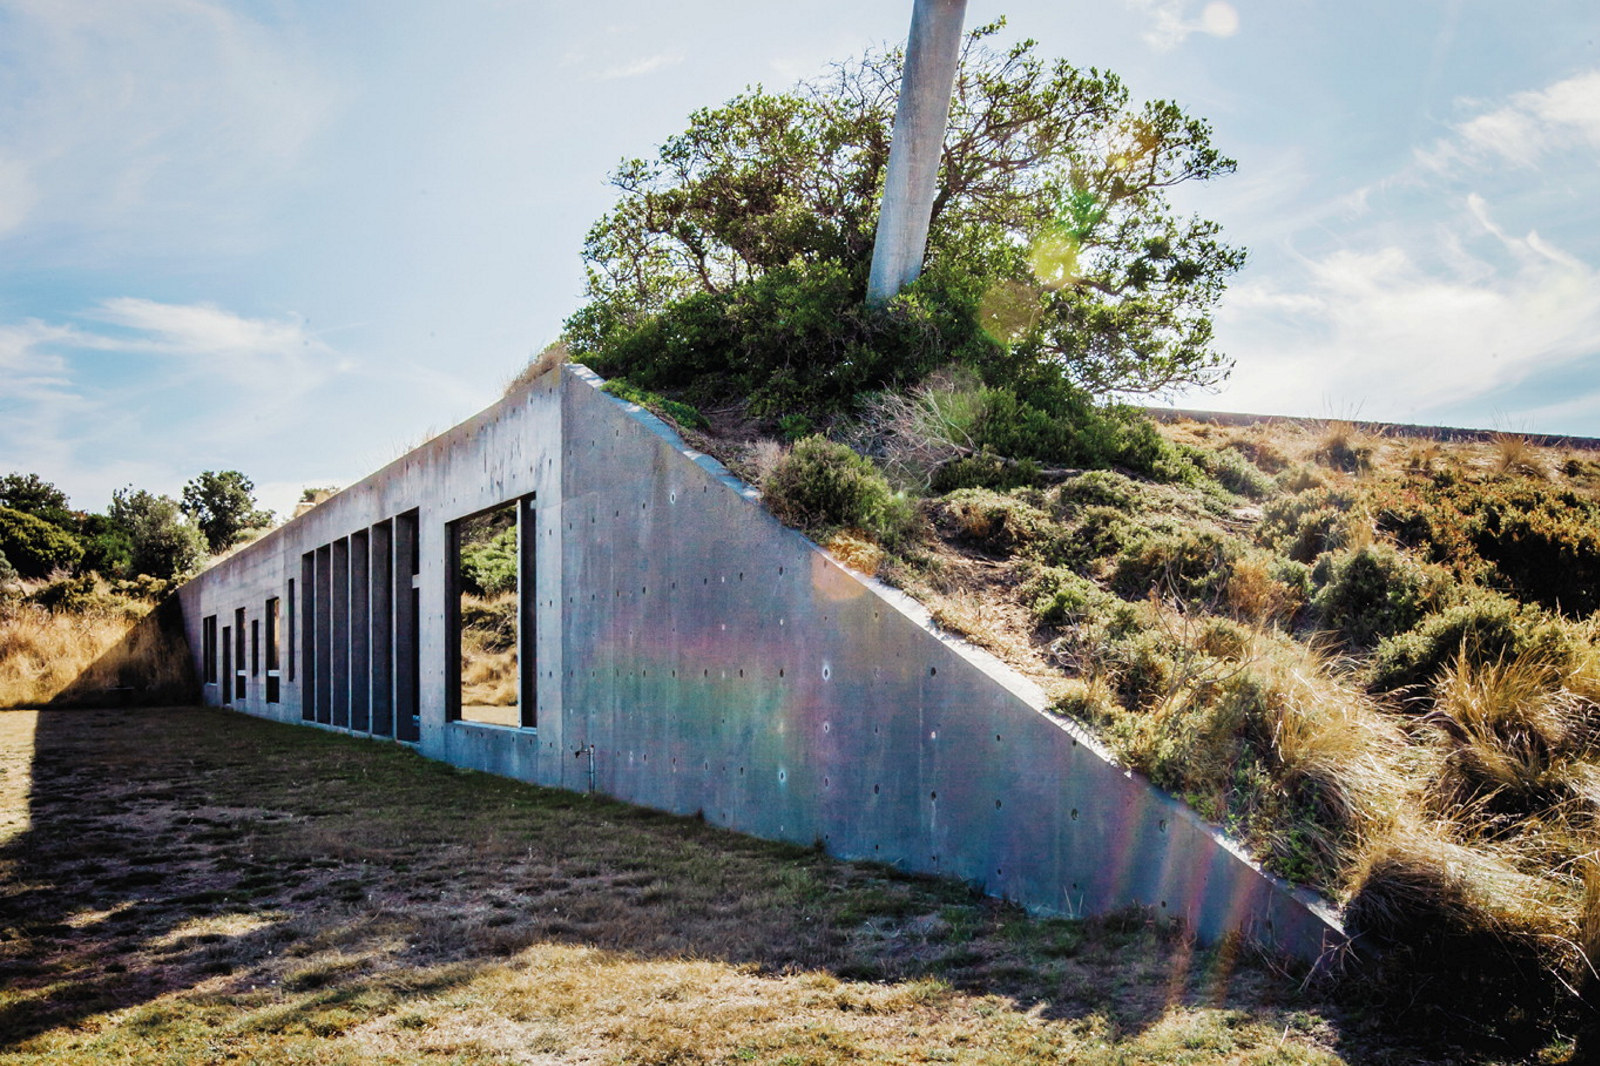 This is a photograph of the front exterior of the house, with concrete walls and large glass windows facing out. The house disappears into a sand dune and has native grasses growing on the roof